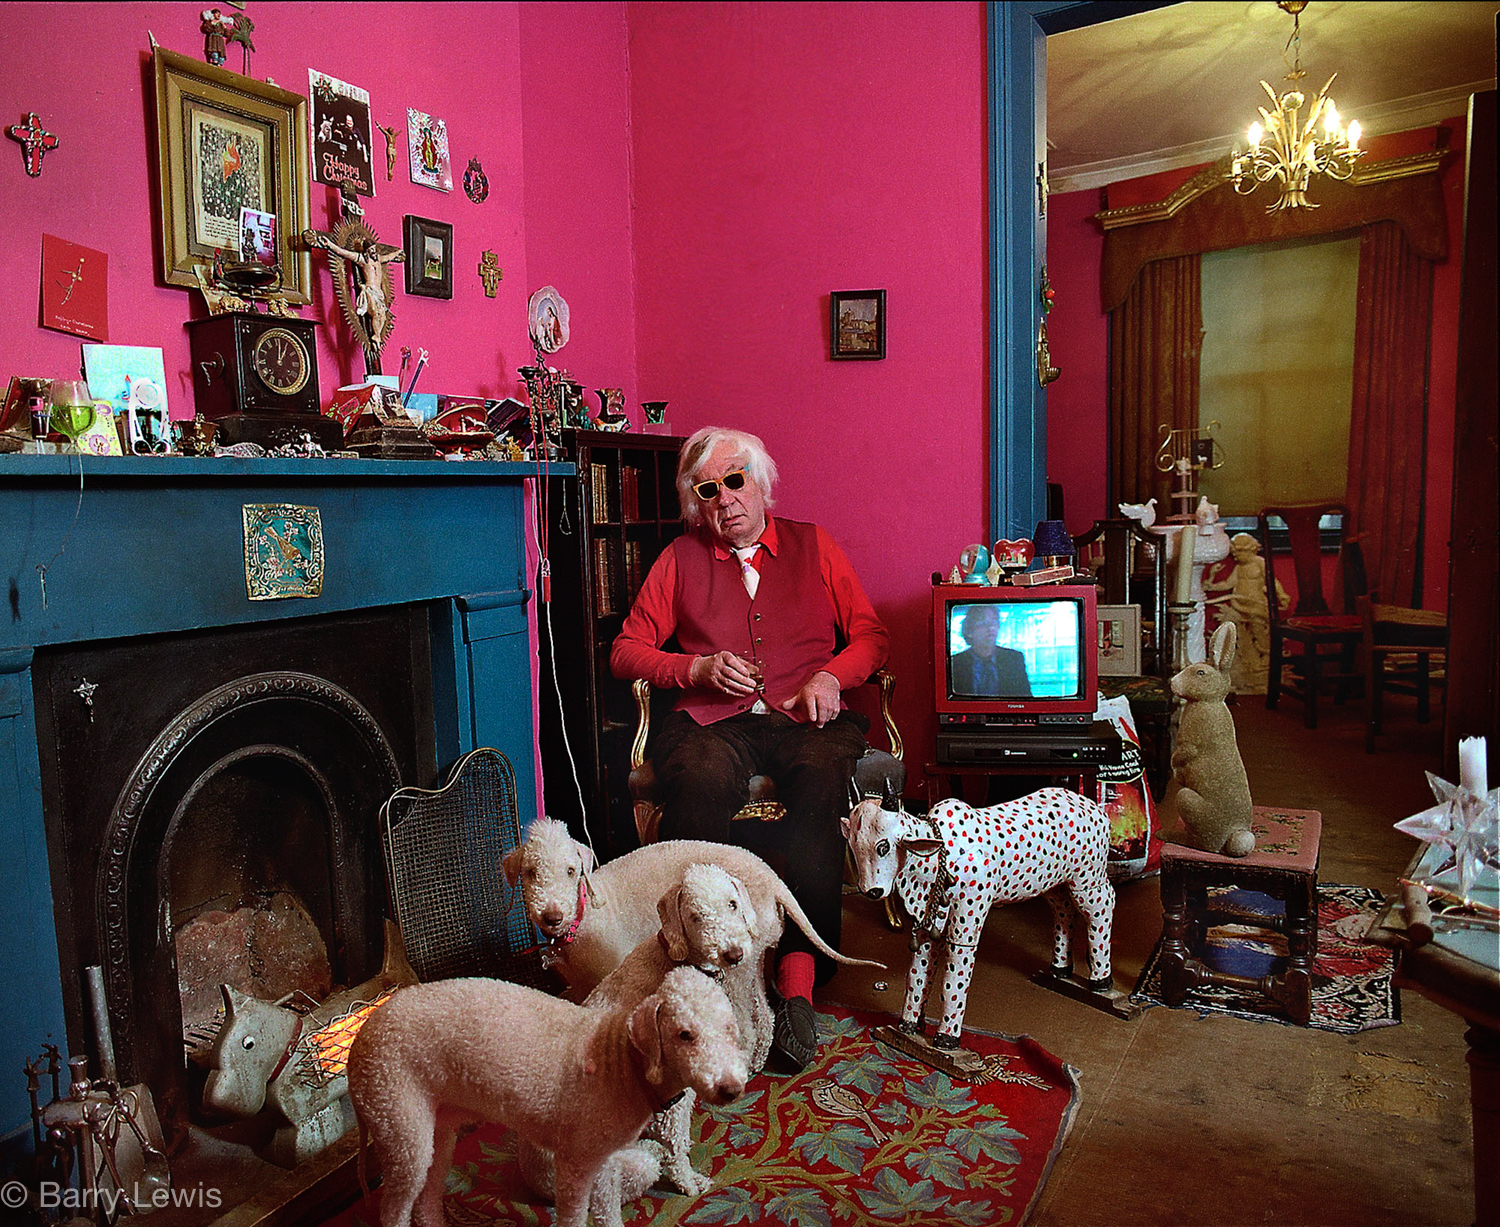  Artist Craigie Aitcheson in his London home and studio in 1999 with his adored Bedlington terriers. 